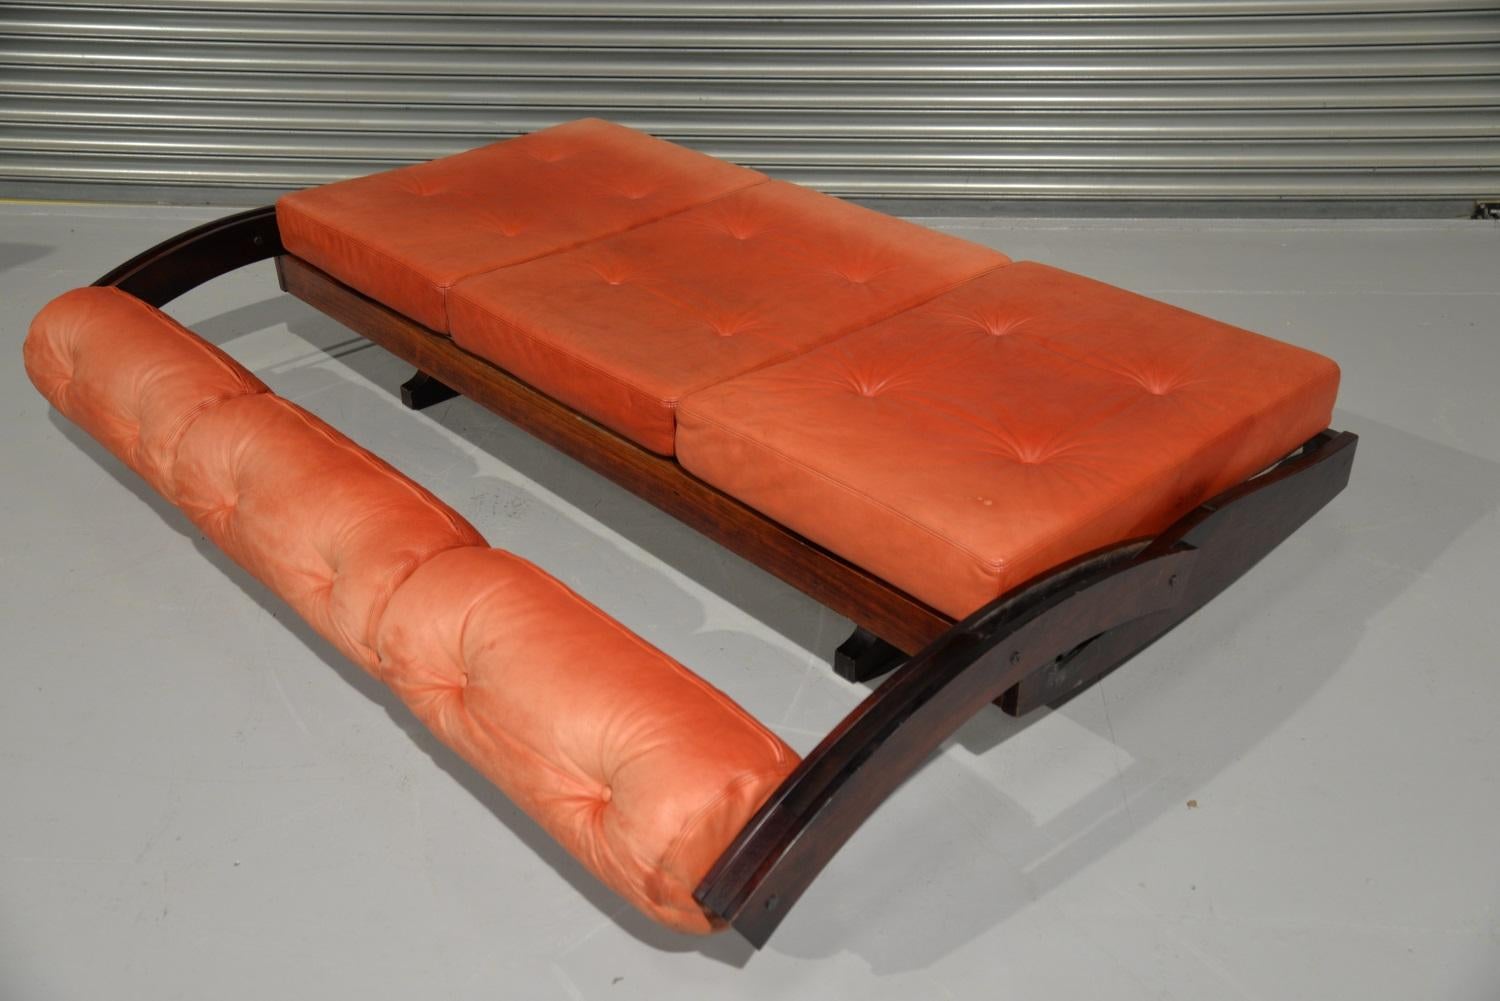 Gianni Songia Daybed/Sofa Designed for Sormani of Italy, 1963 For Sale 4